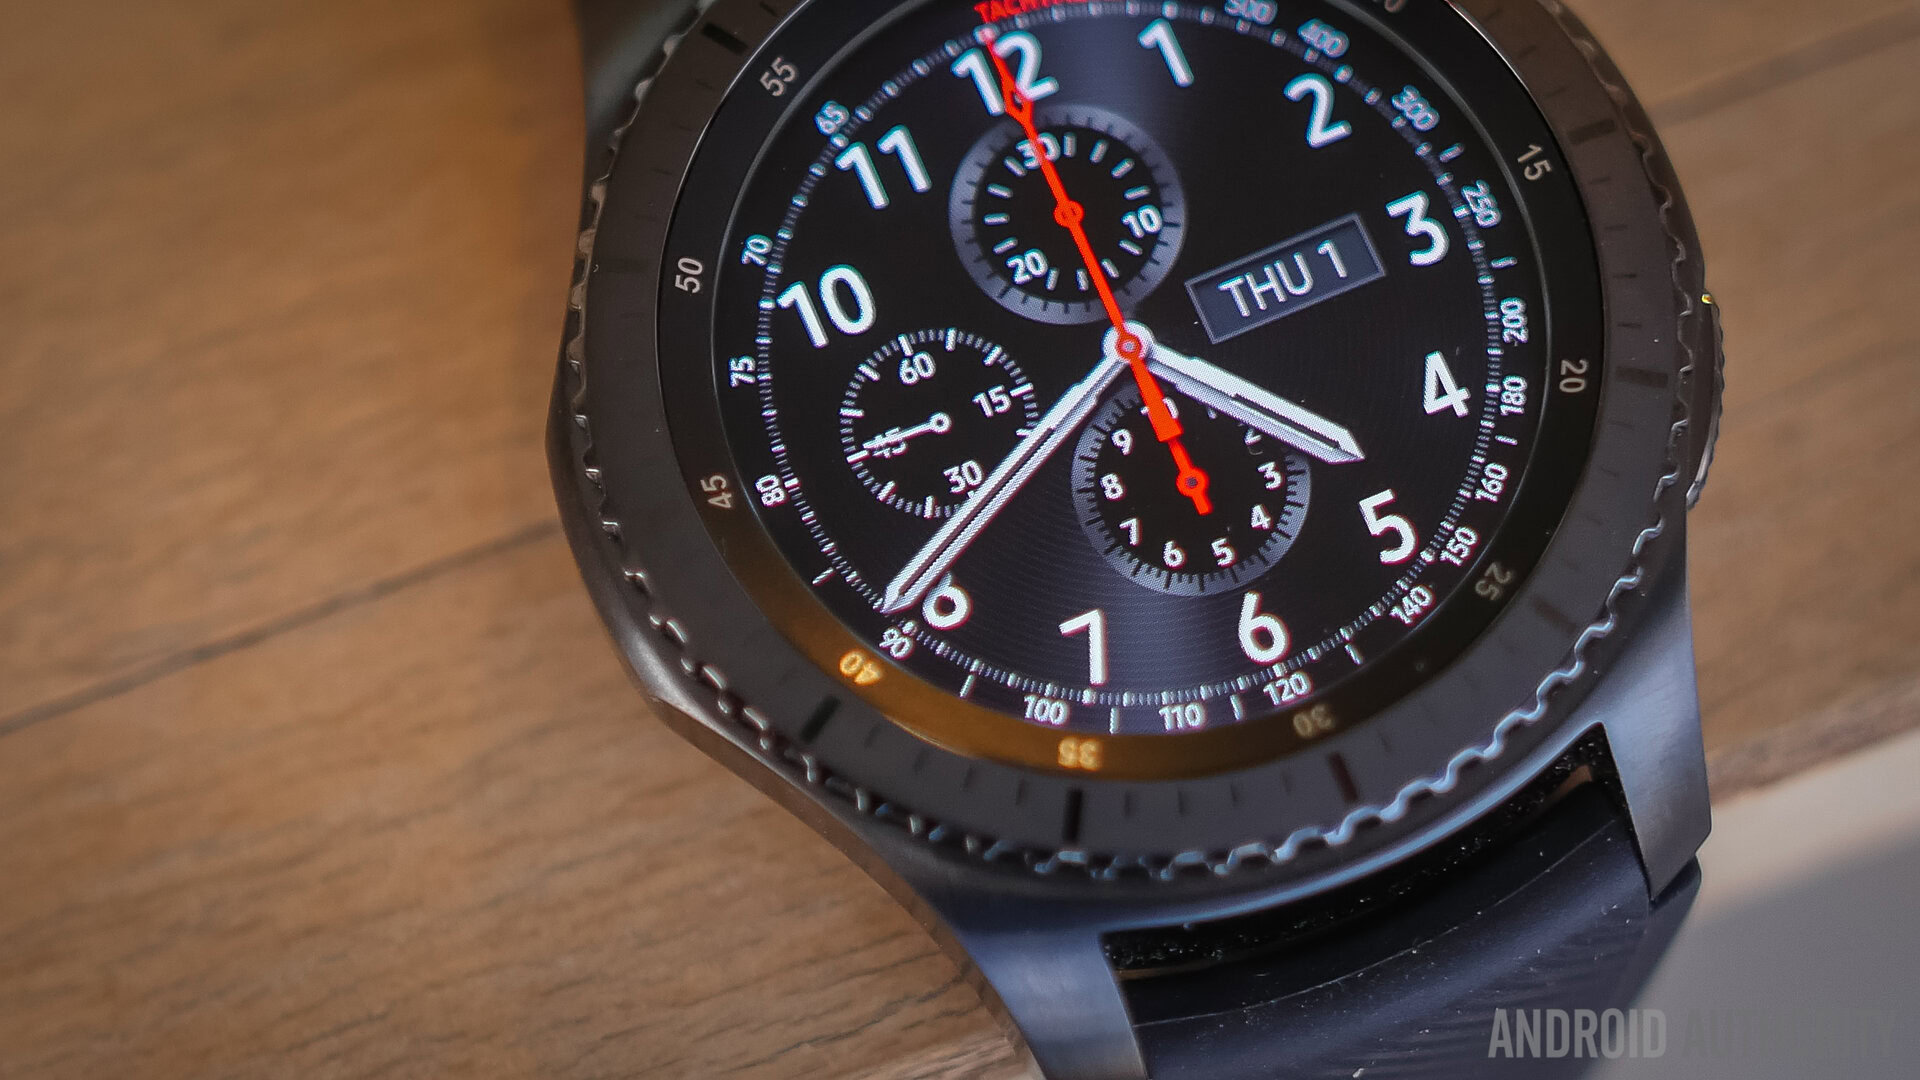 Samsung galaxy watch: everything you need to know